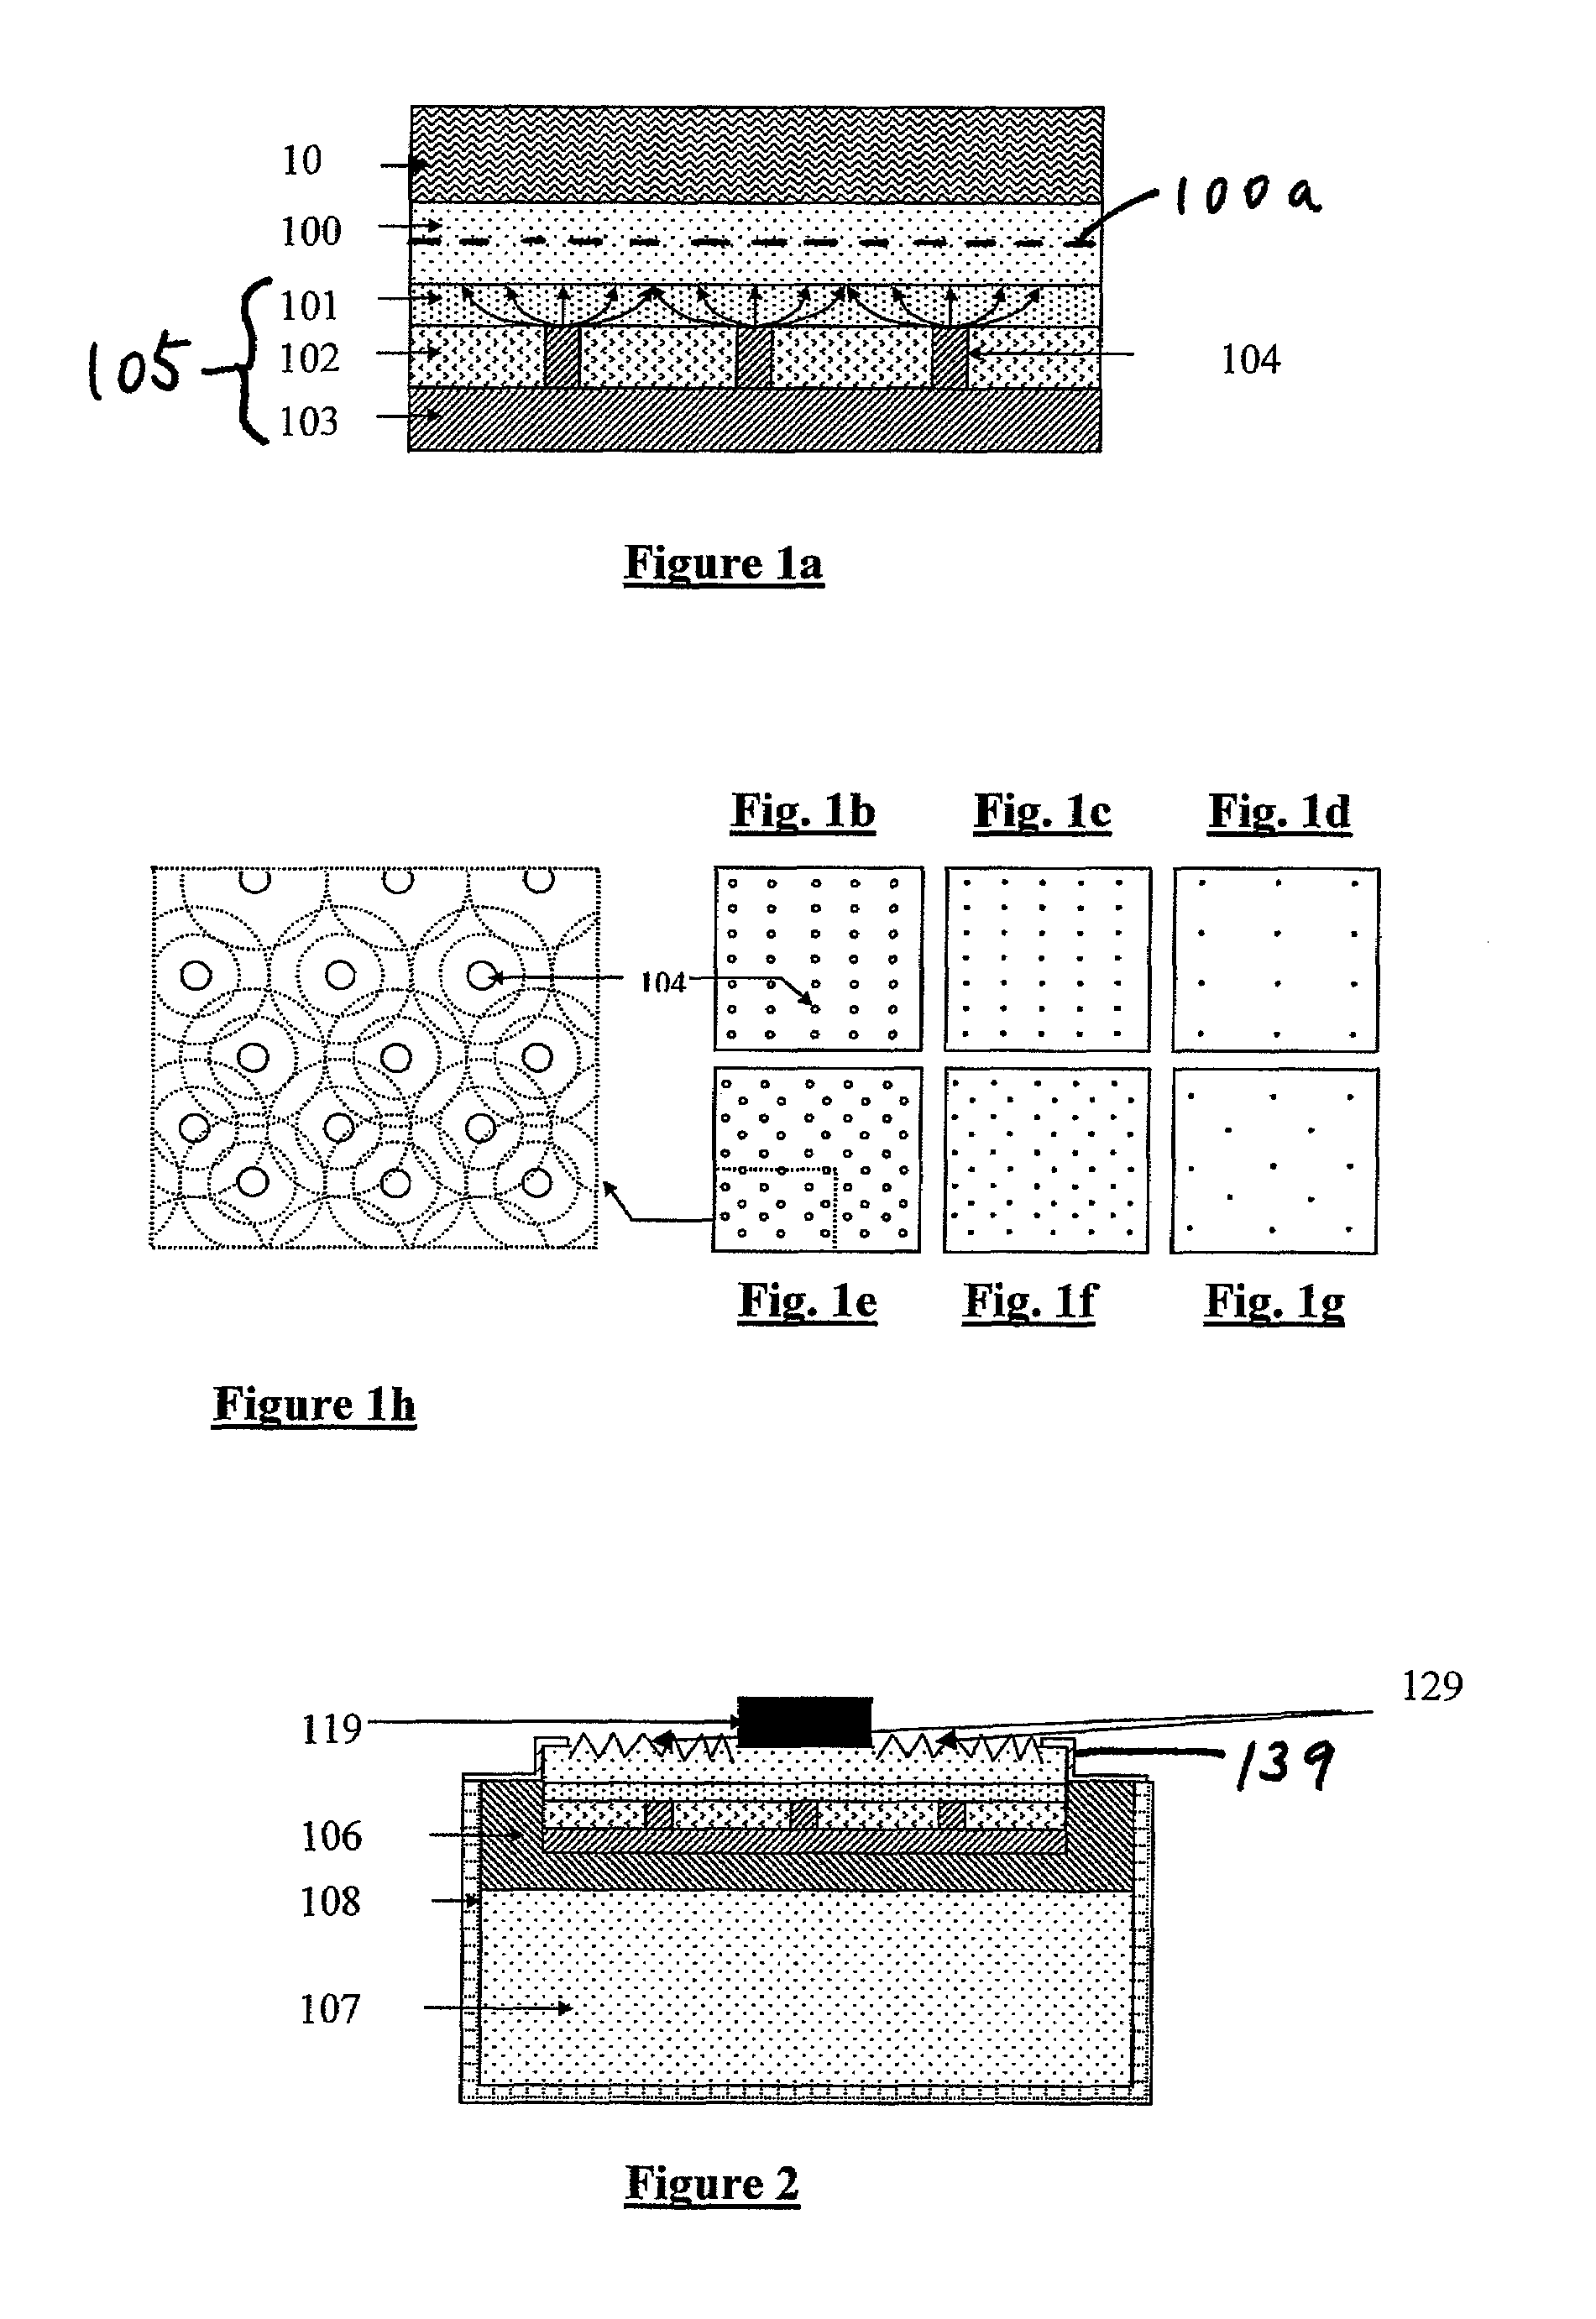 High light efficiency solid-state light emitting structure and methods to manufacturing the same